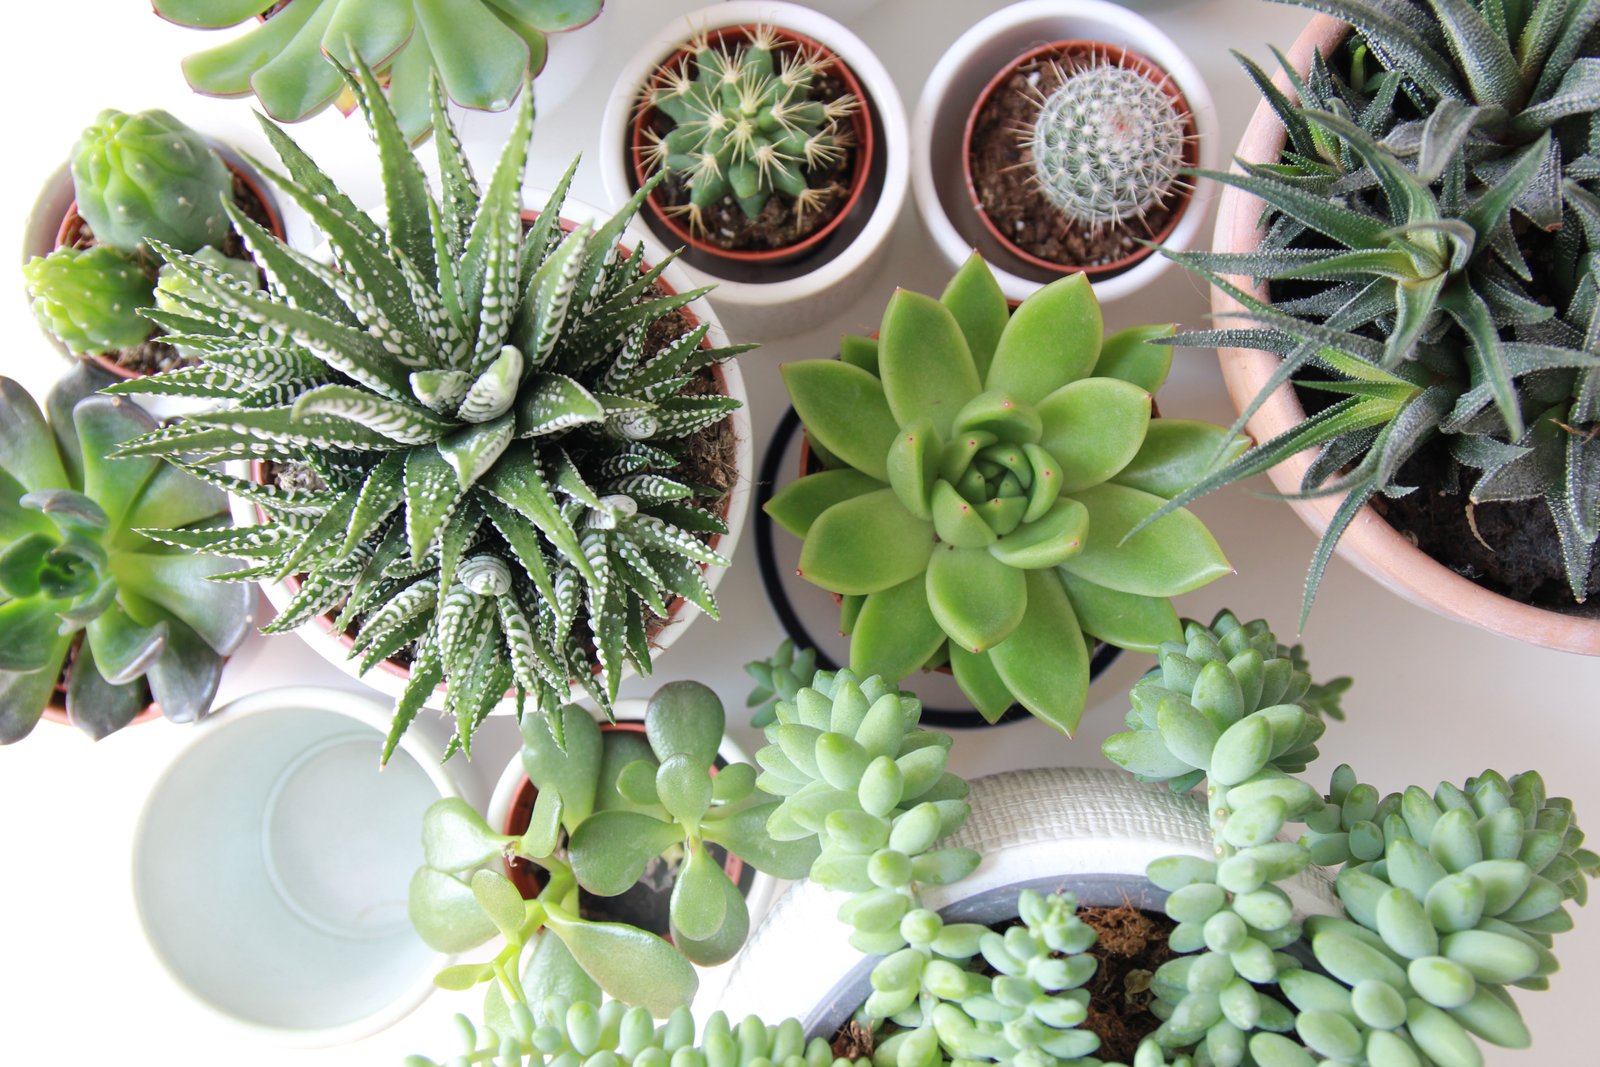 How to propagate succulent plants easily- The Thrifty Island Girl